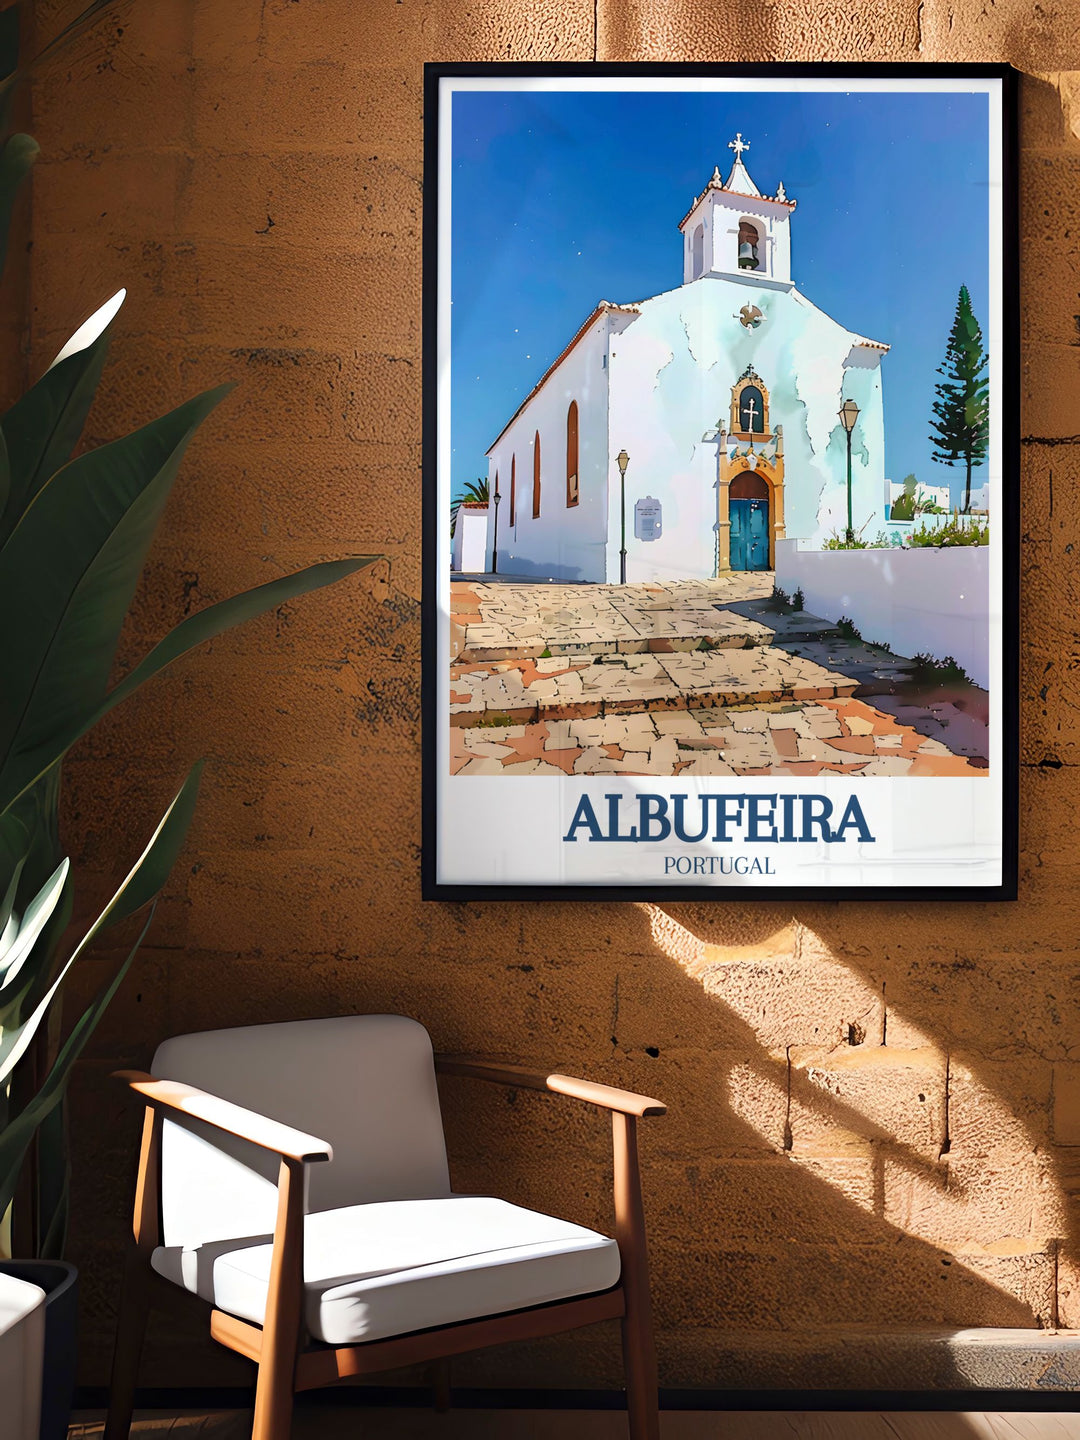 Albufeira wall art featuring the stunning St Anna Church, designed to bring a sense of peace and historical charm to your home decor.